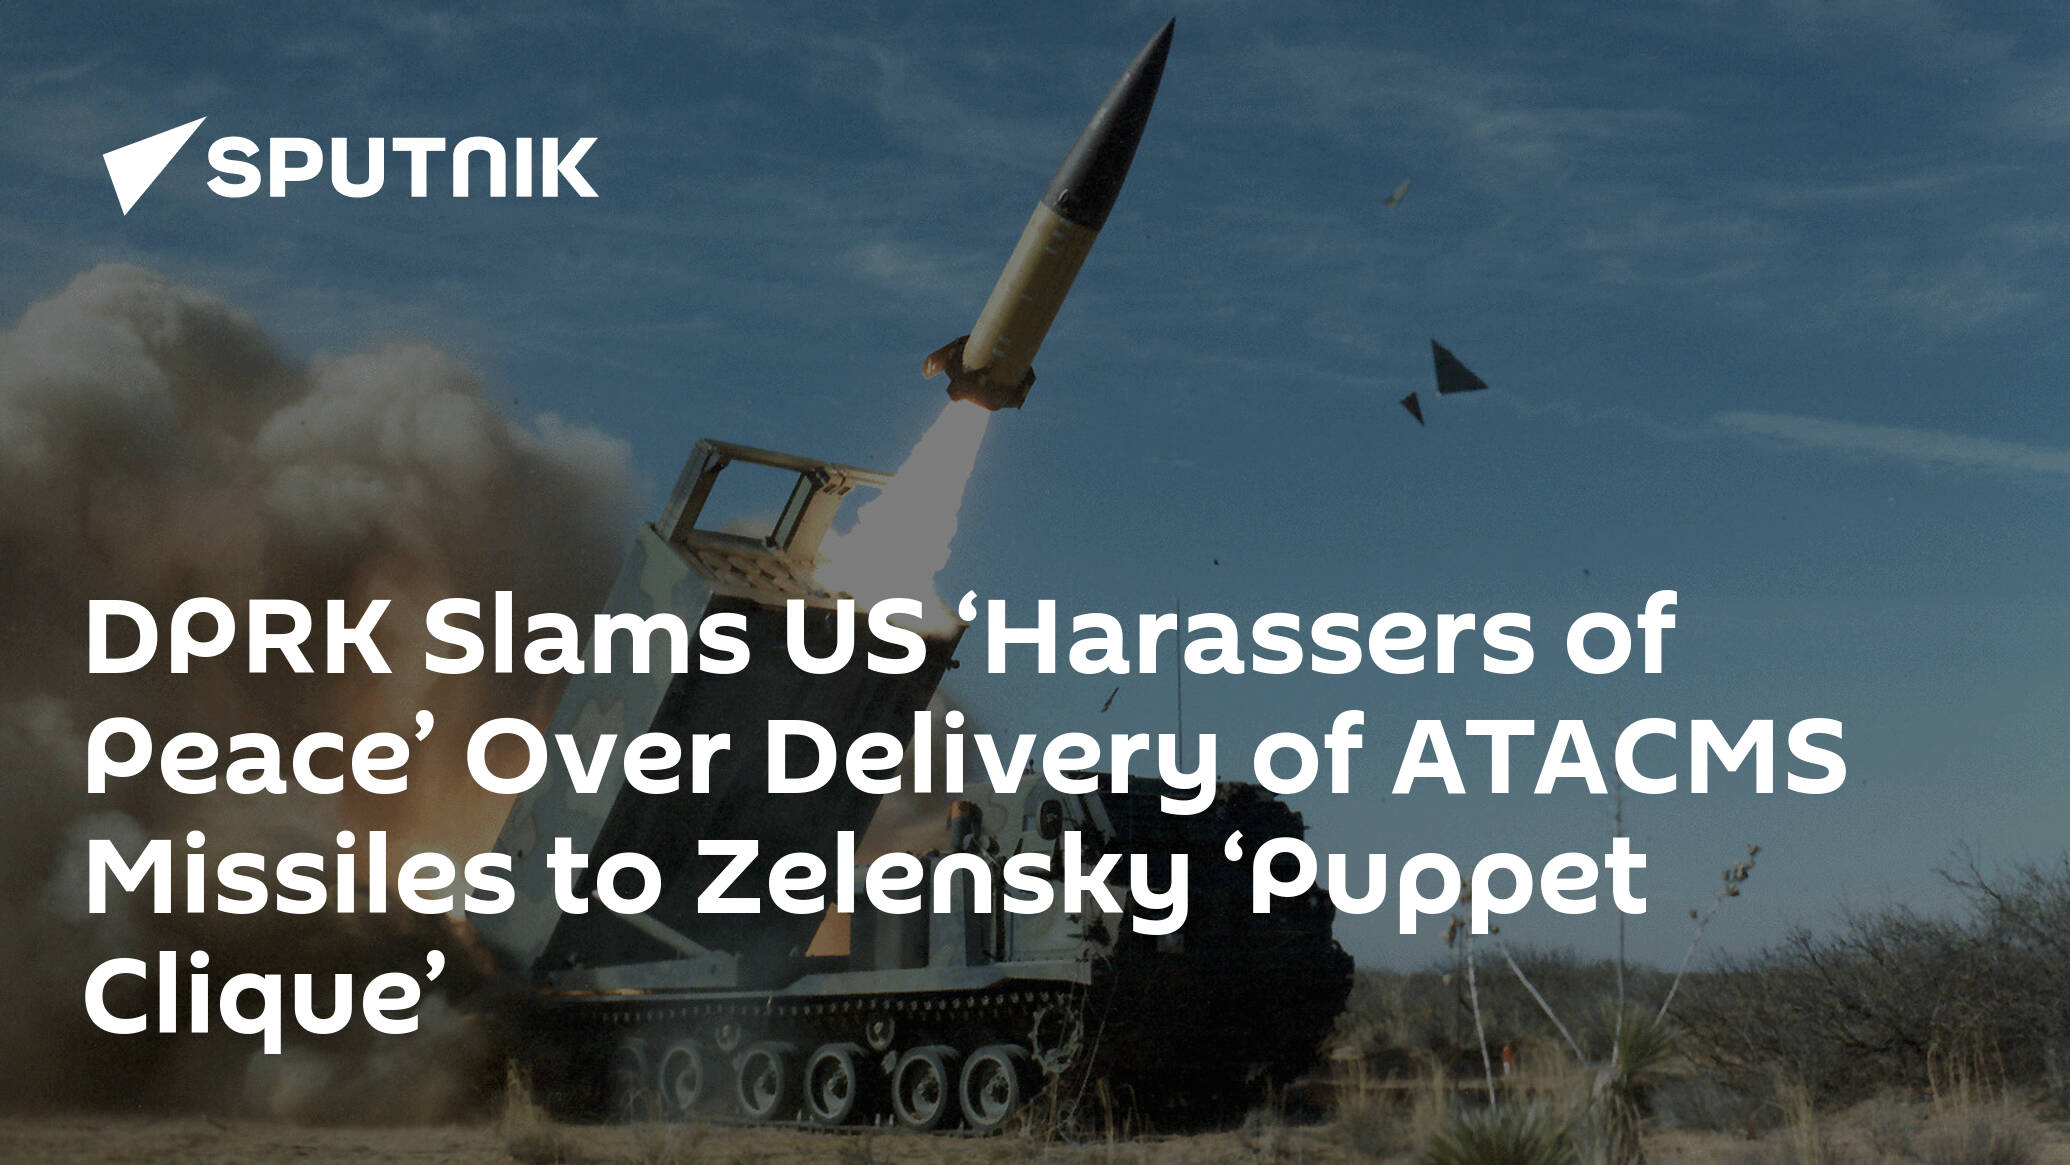 DPRK Slams US ‘Harassers of Peace’ Over Delivery of ATACMS Missiles to Zelensky ‘Puppet Clique’